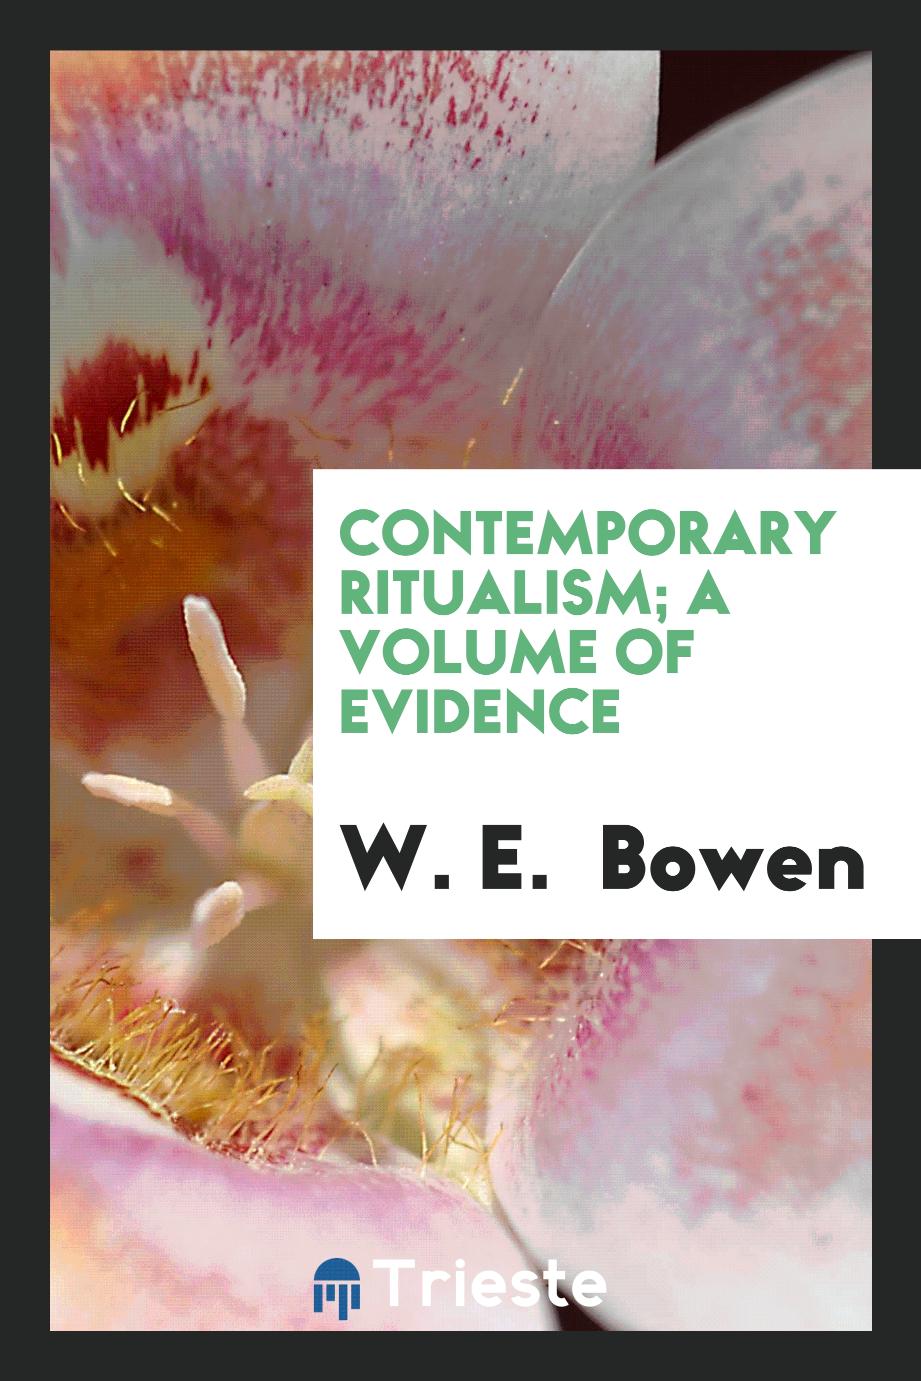 Contemporary ritualism; a volume of evidence